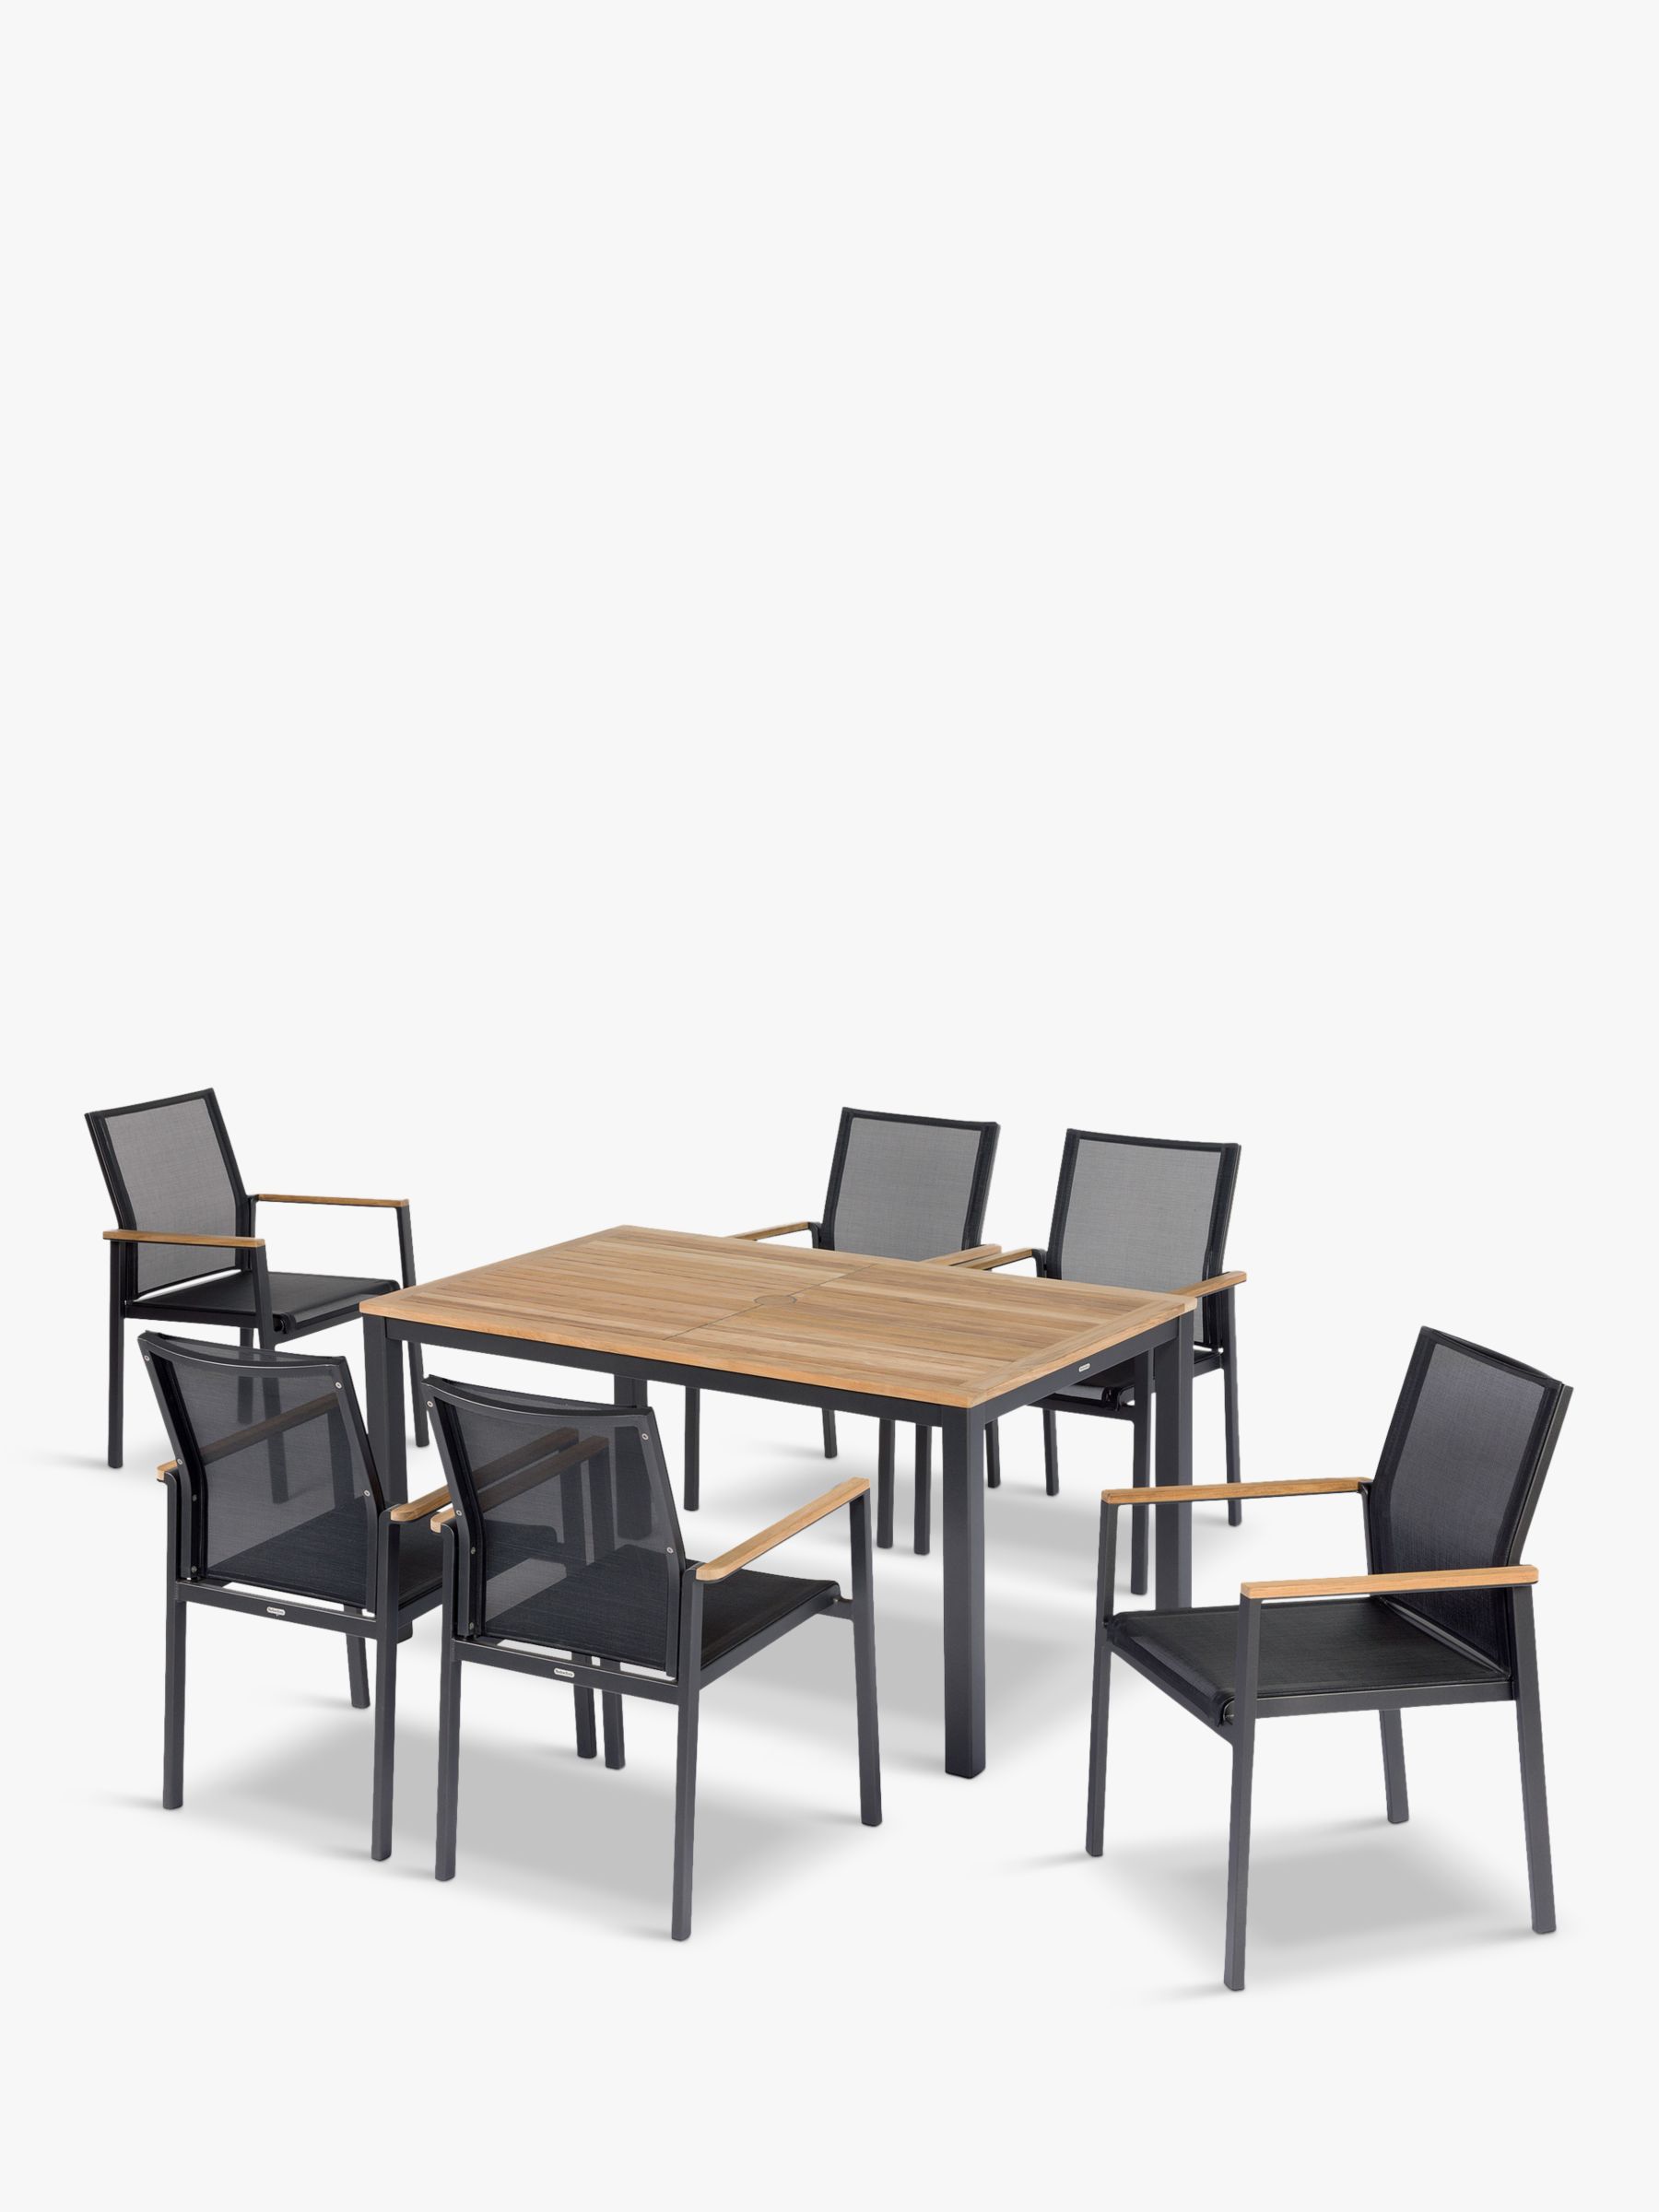 Photo of Barlow tyrie aura 6-seater teak wood garden dining table & chairs set charcoal/natural